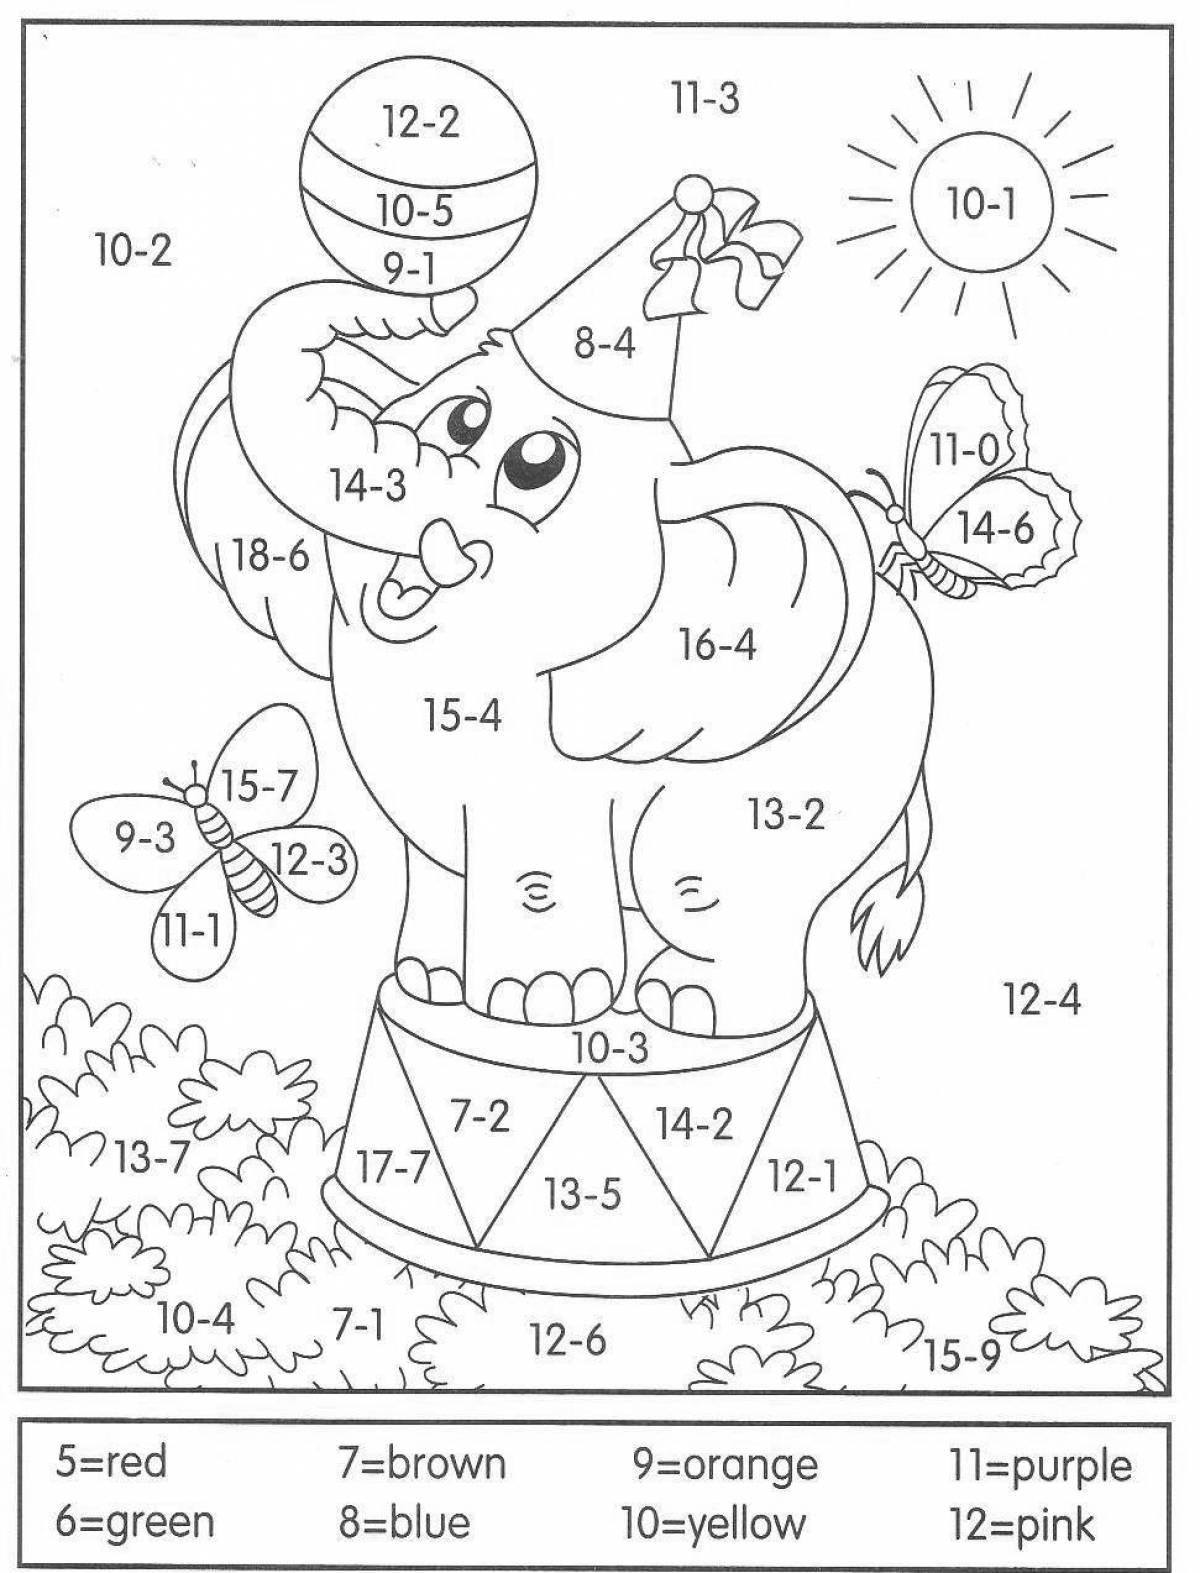 Educational coloring book math under 20